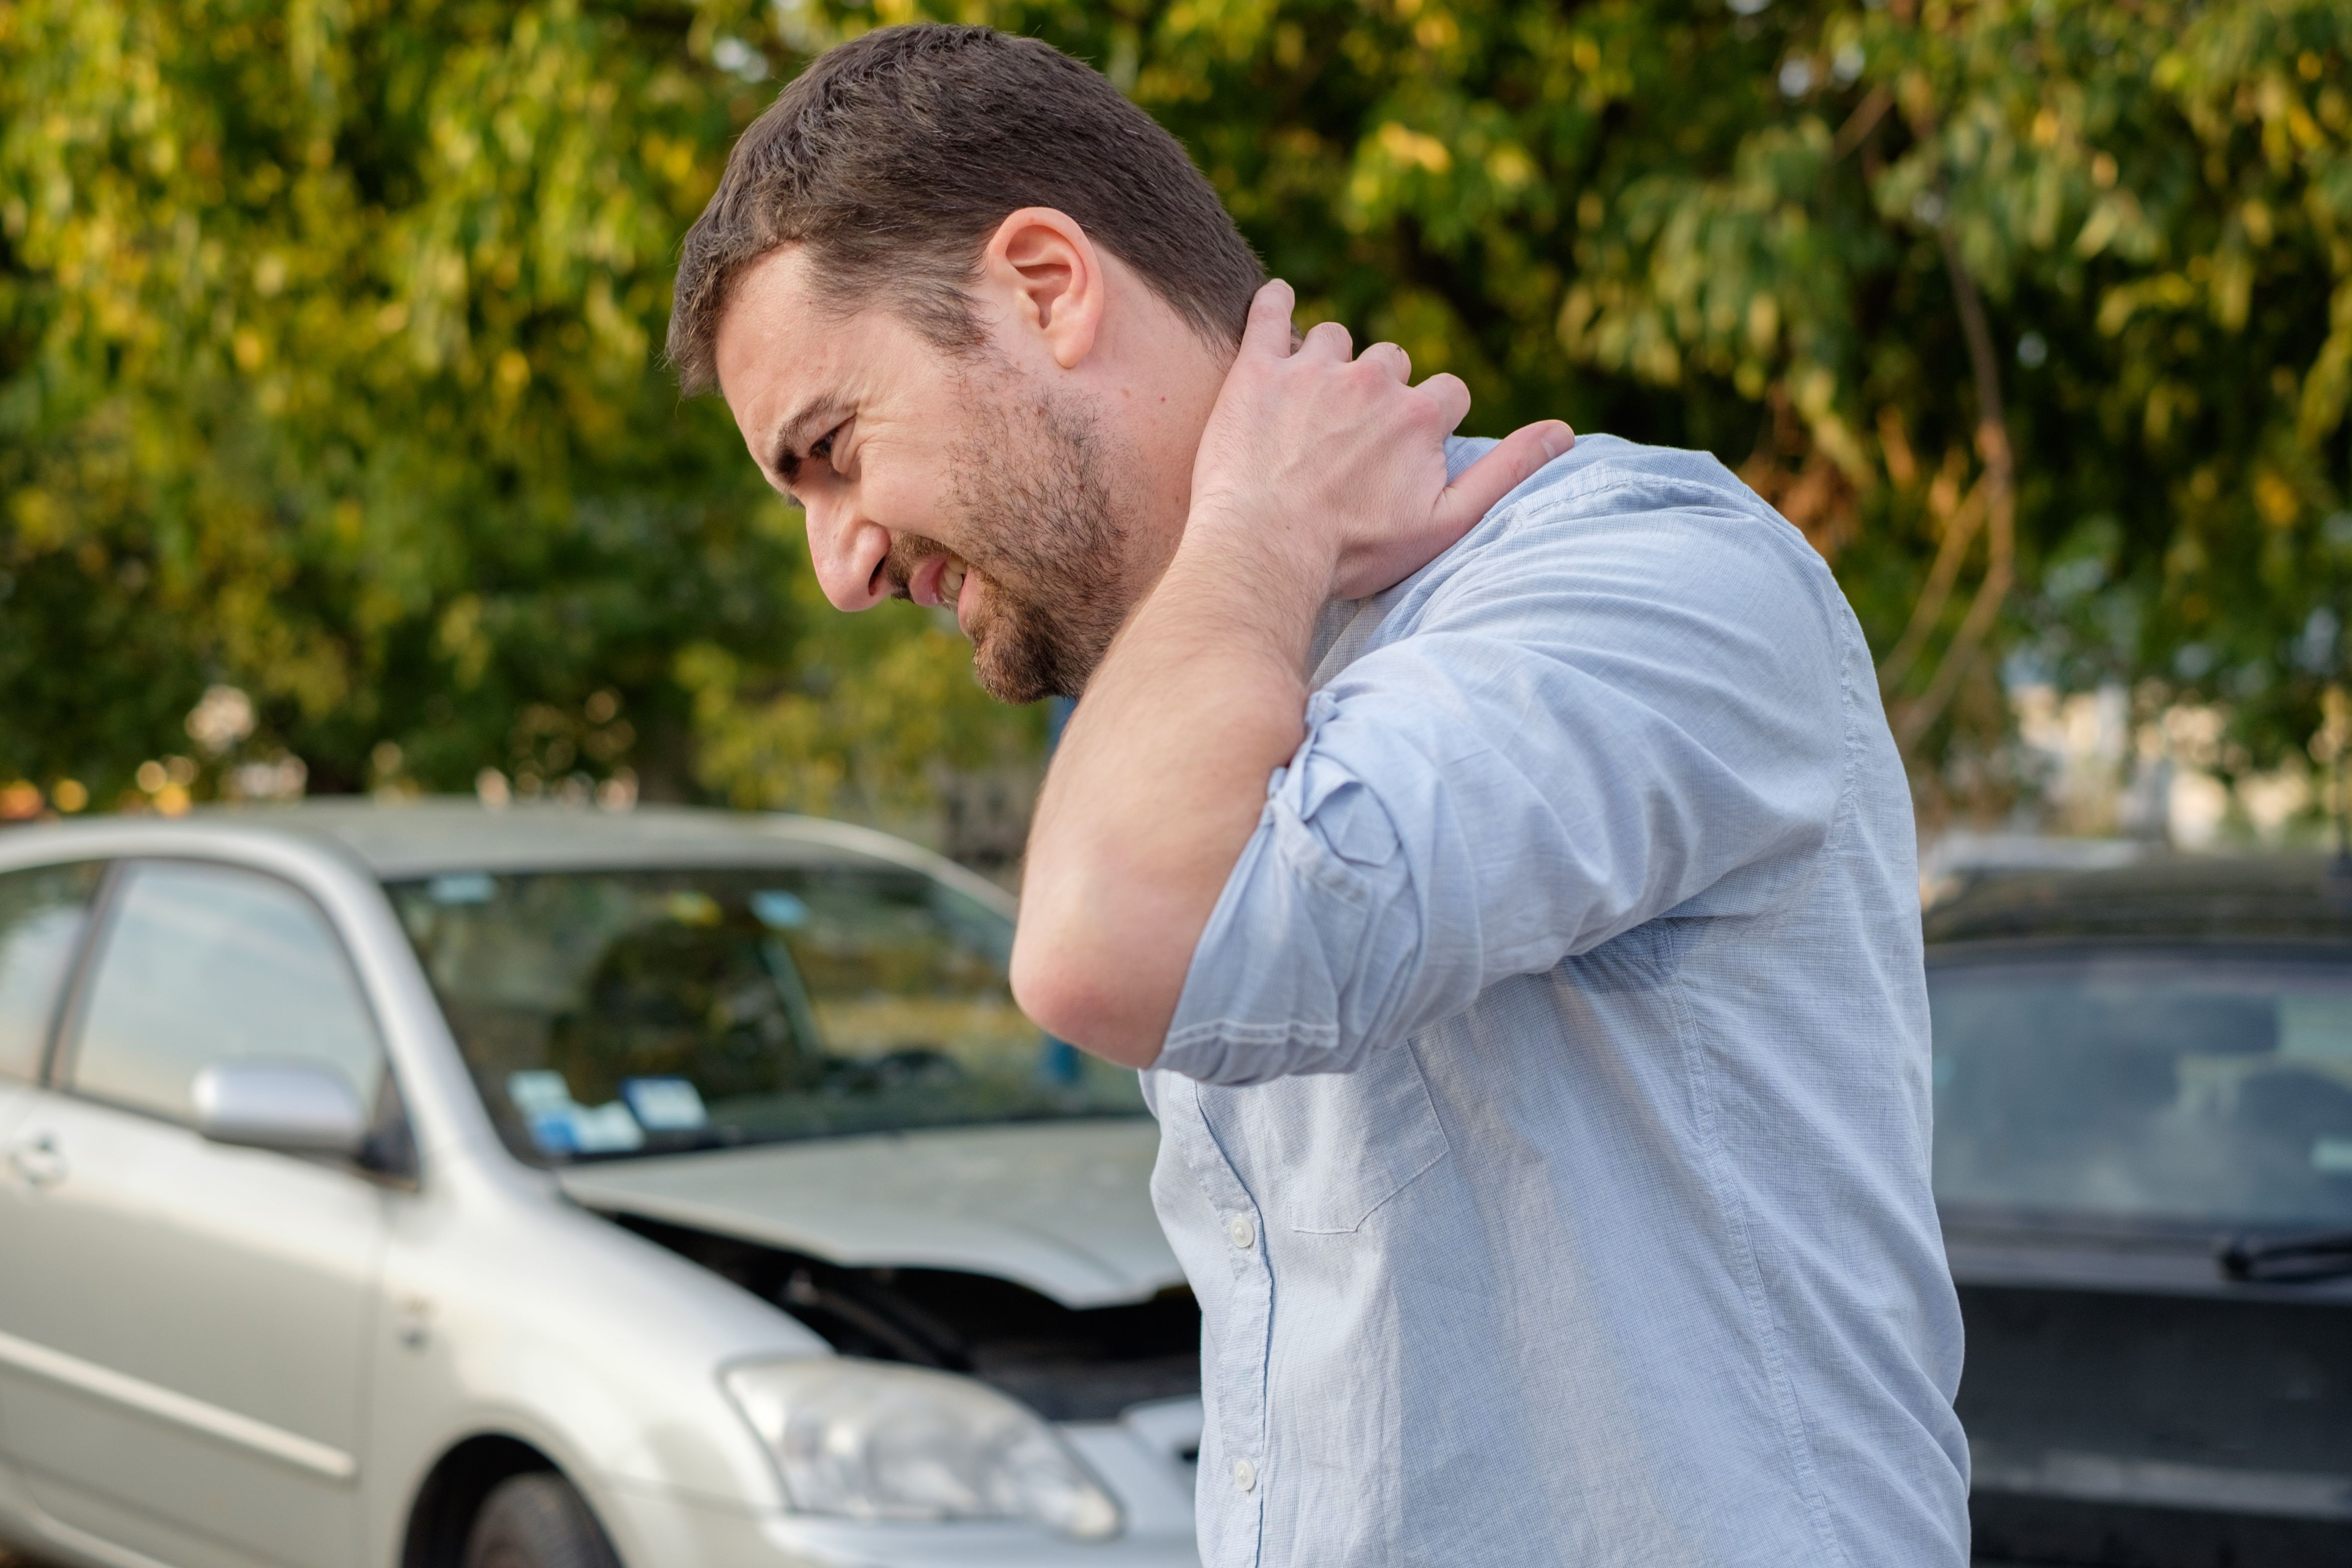 How Soon After a Car Accident Should I See a Chiropractor?